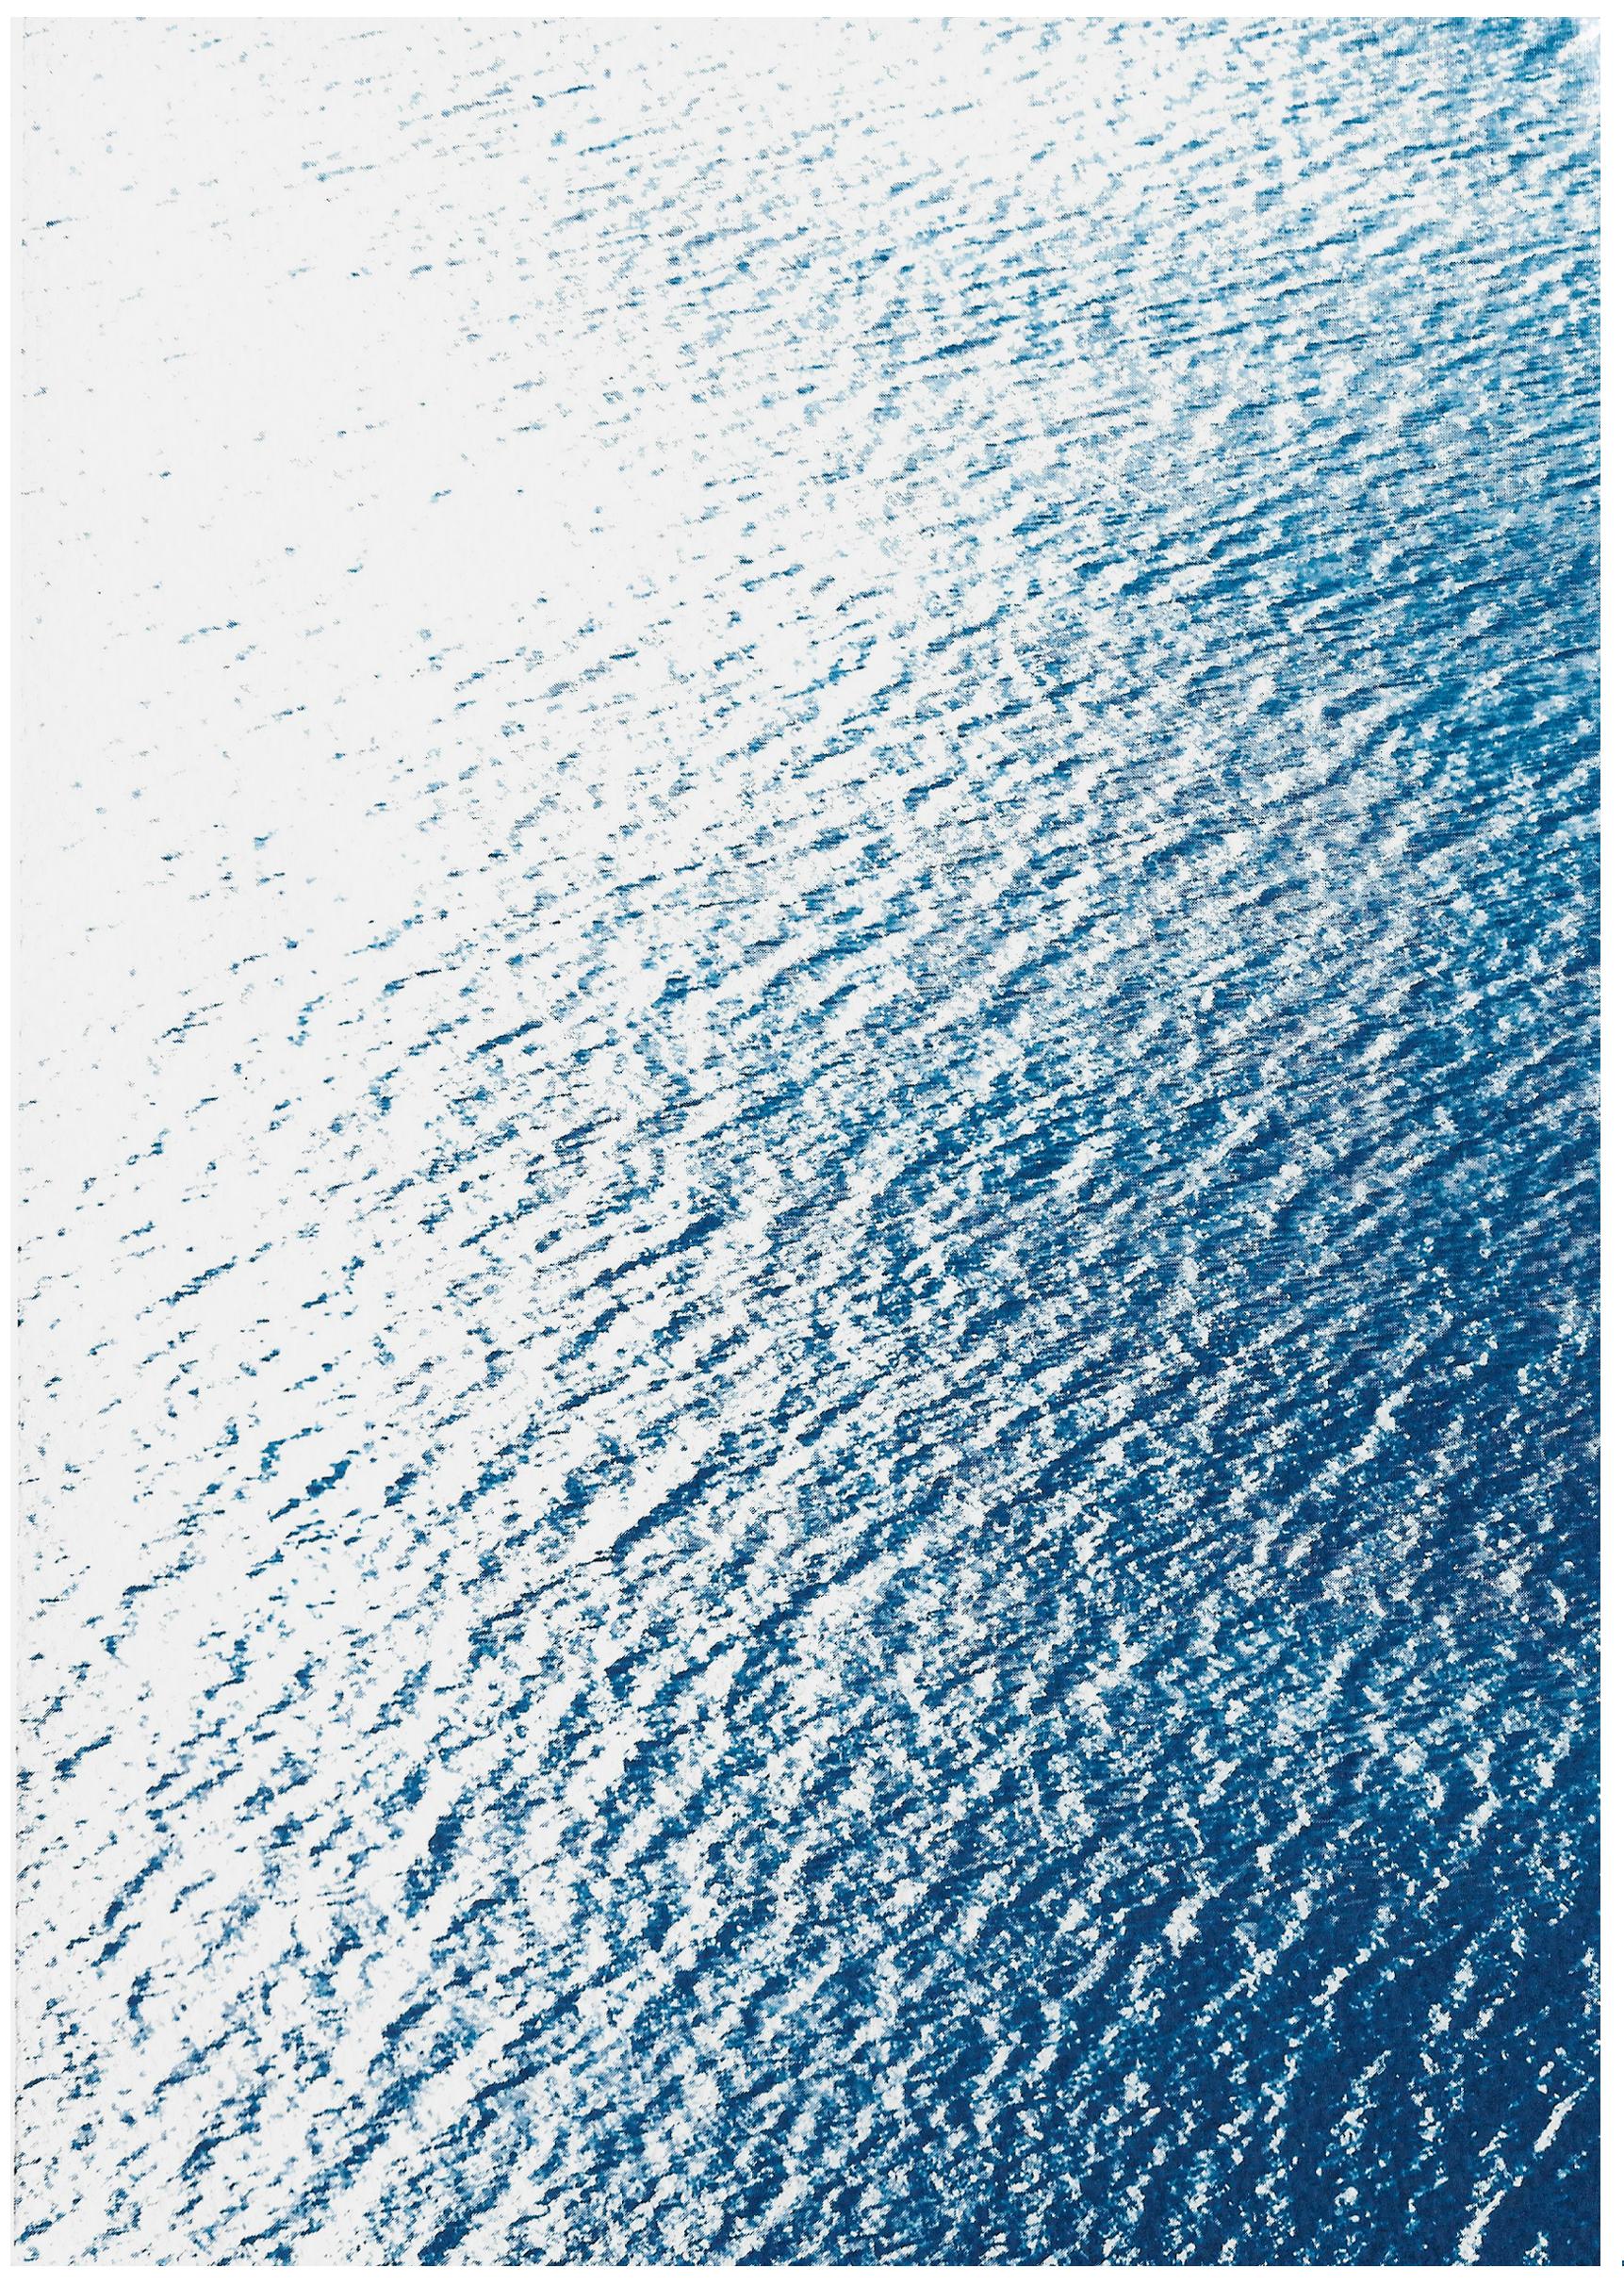 Nautical Diptych of Smooth Bay in the Mediterranean, Zen Waters Cyanotype, Paper - Minimalist Painting by Kind of Cyan